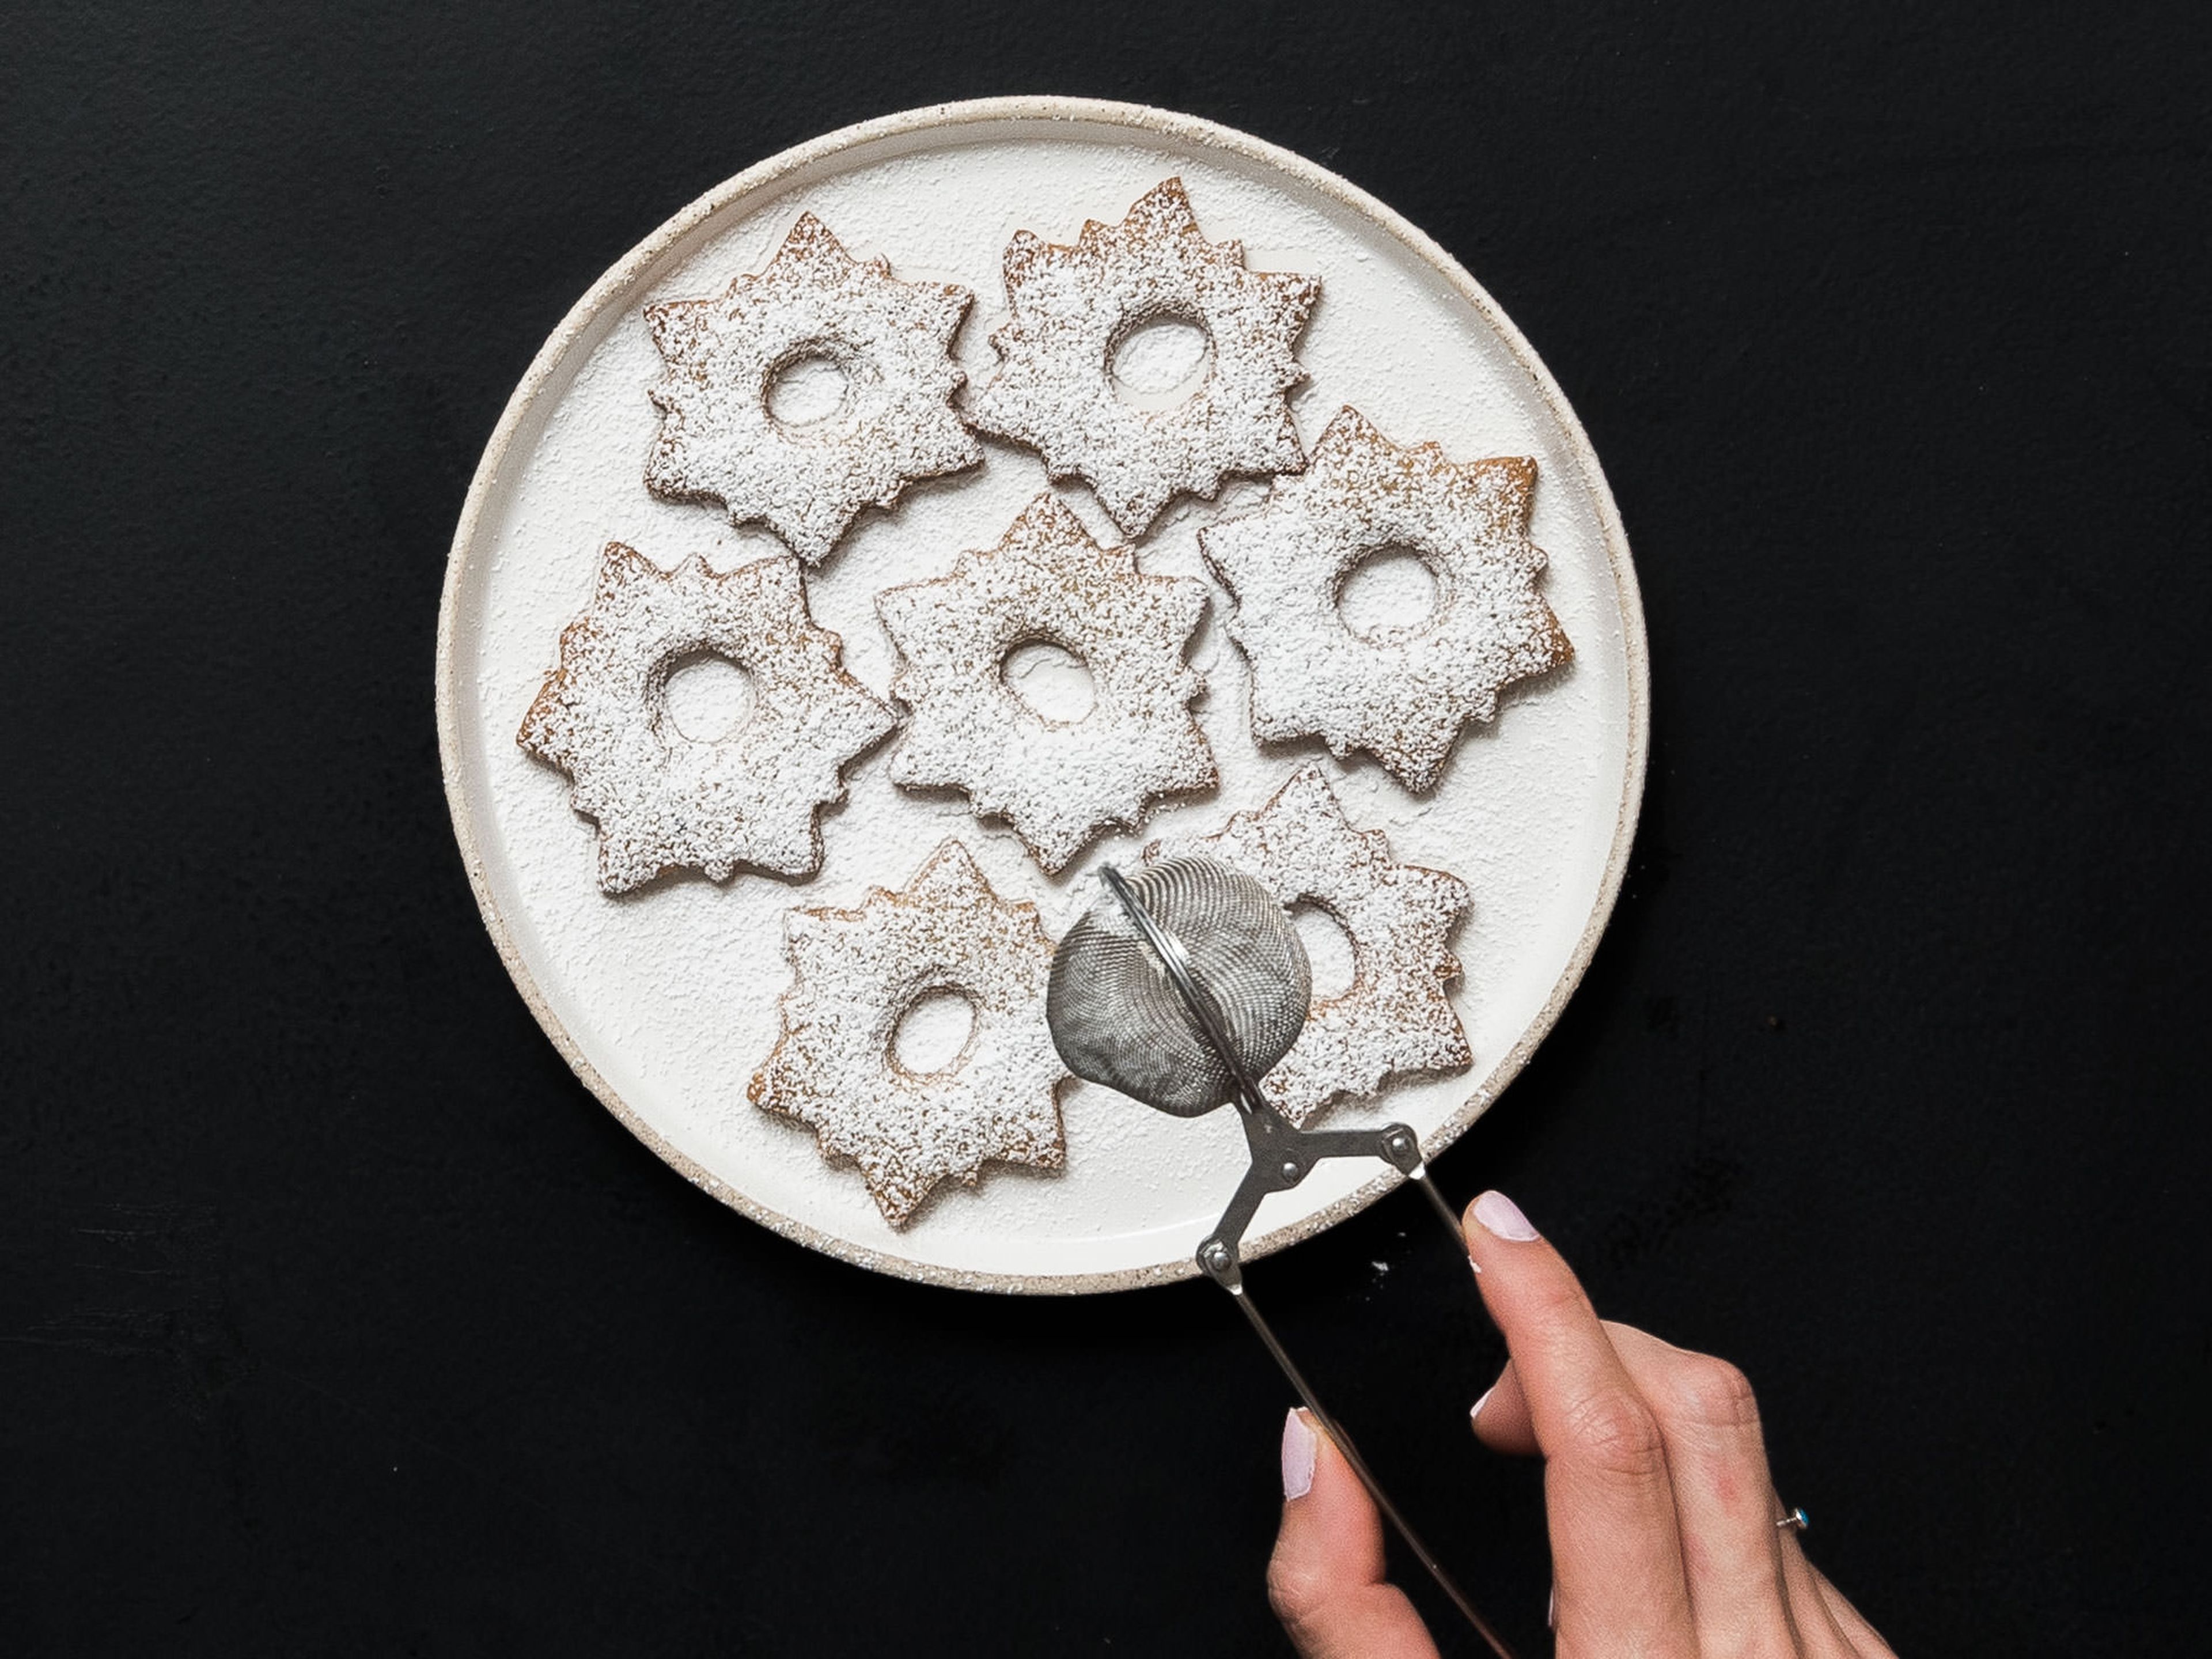 When cookies have cooled completely, dust the cookies with the hole with confectioner’s sugar.